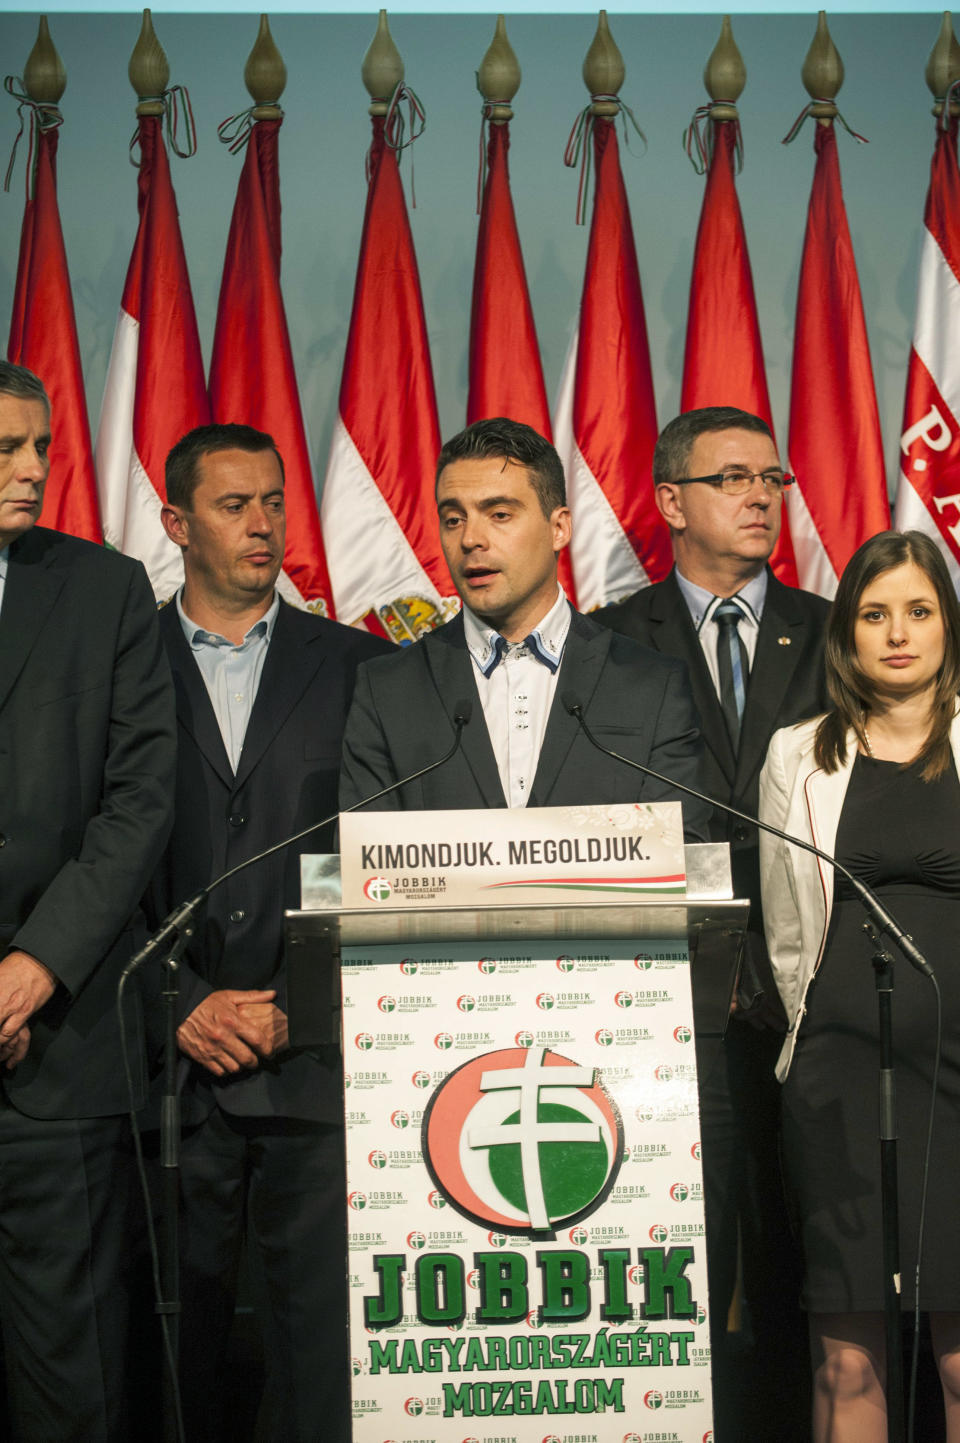 Chairman of the radical nationalist Jobbik party Gabor Vona, center, delivers his speech after the parliamentary elections in the Budapest Congress Centre in Budapest, Hungary, late Sunday, April 6, 2014. (AP Photo/MTI, Janos Marjai)